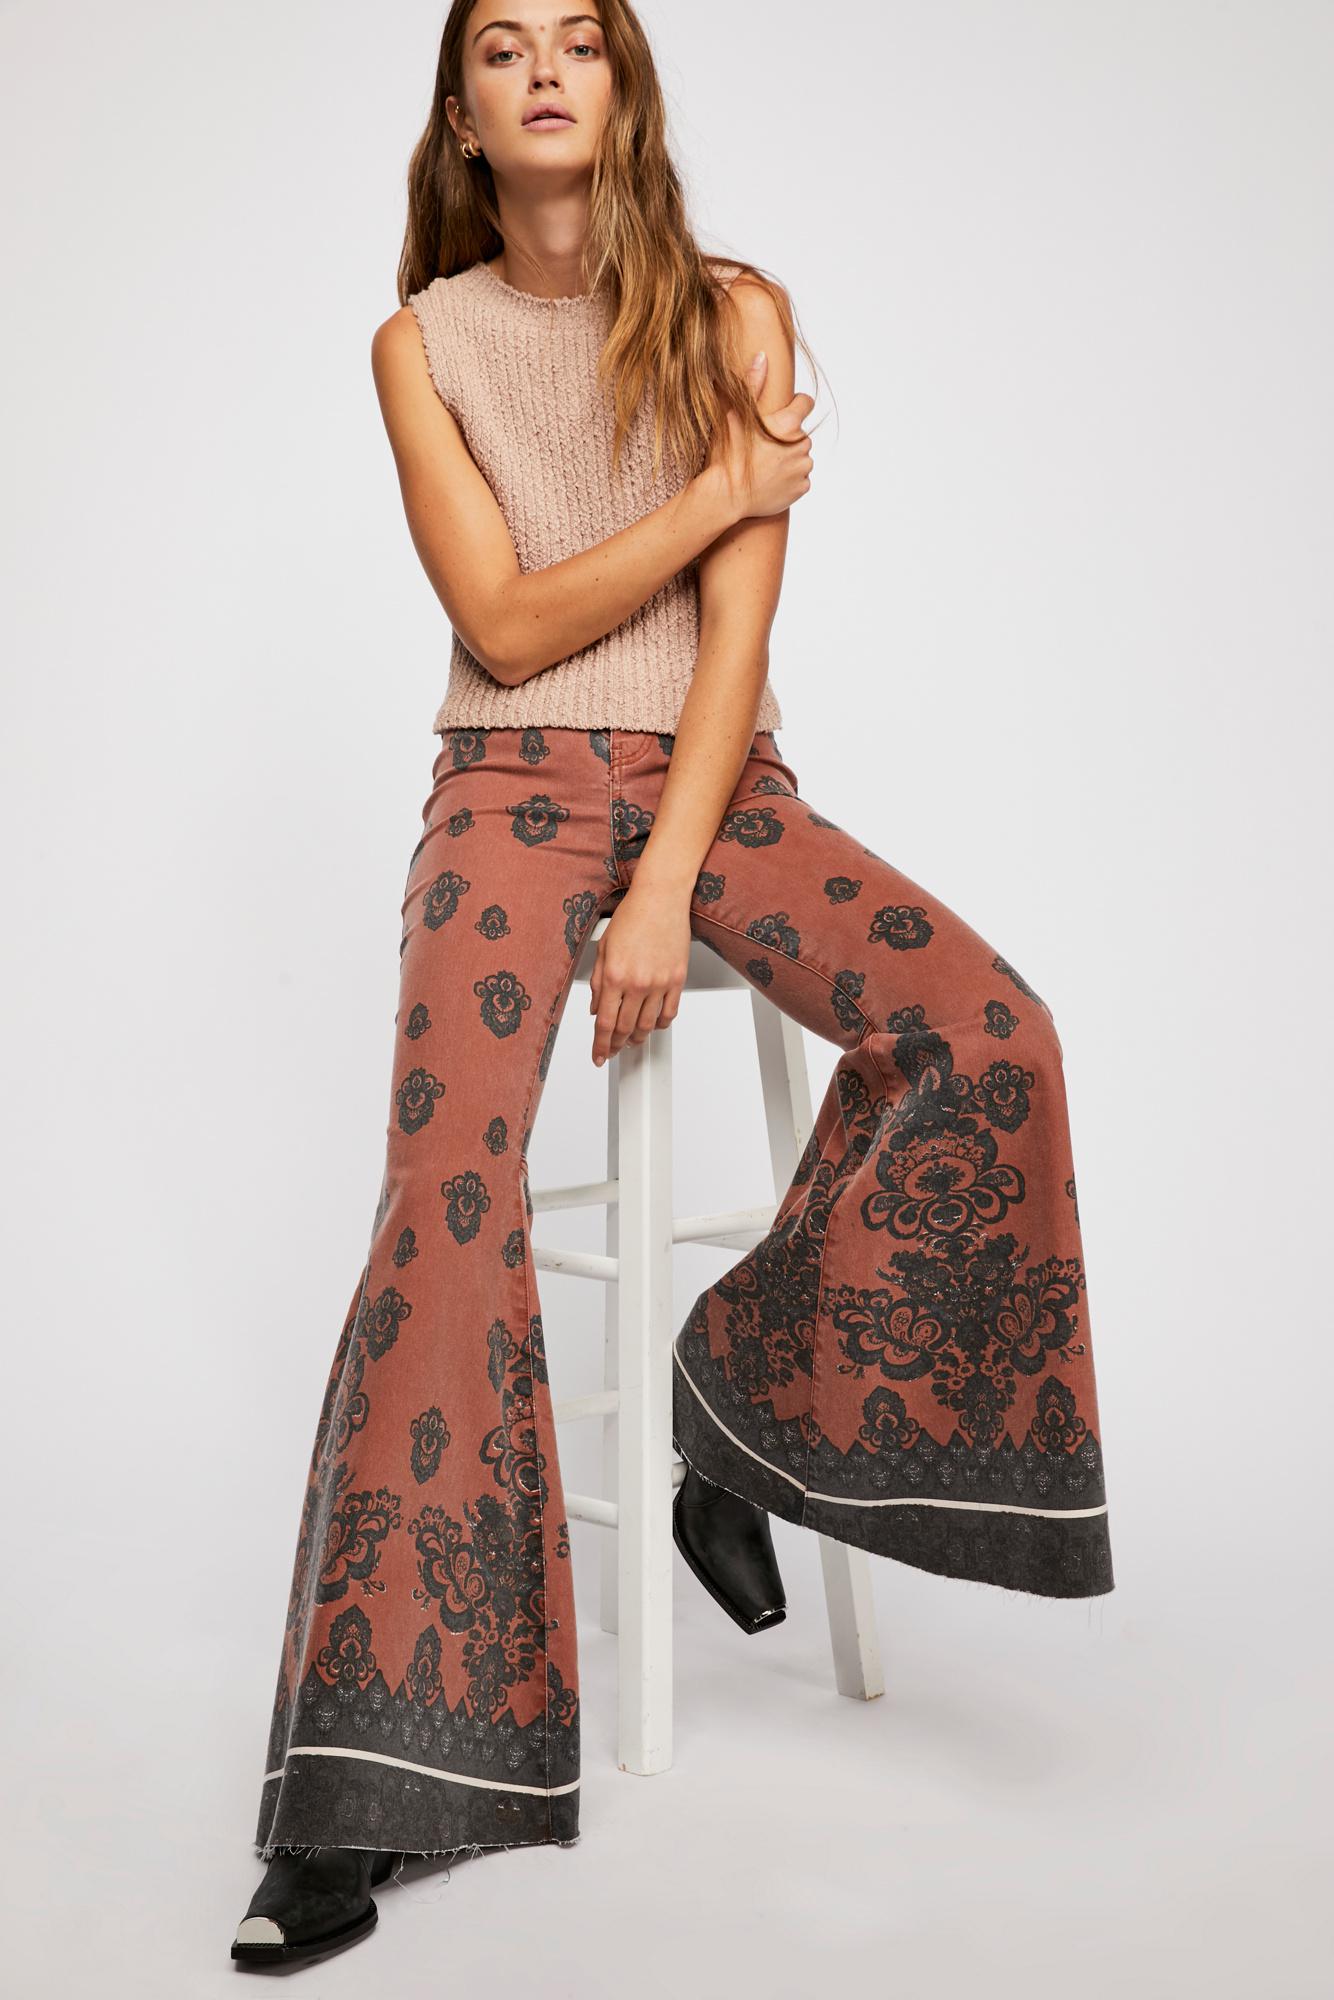 Free People Just Float On Printed Flare Jeans By We The Free in